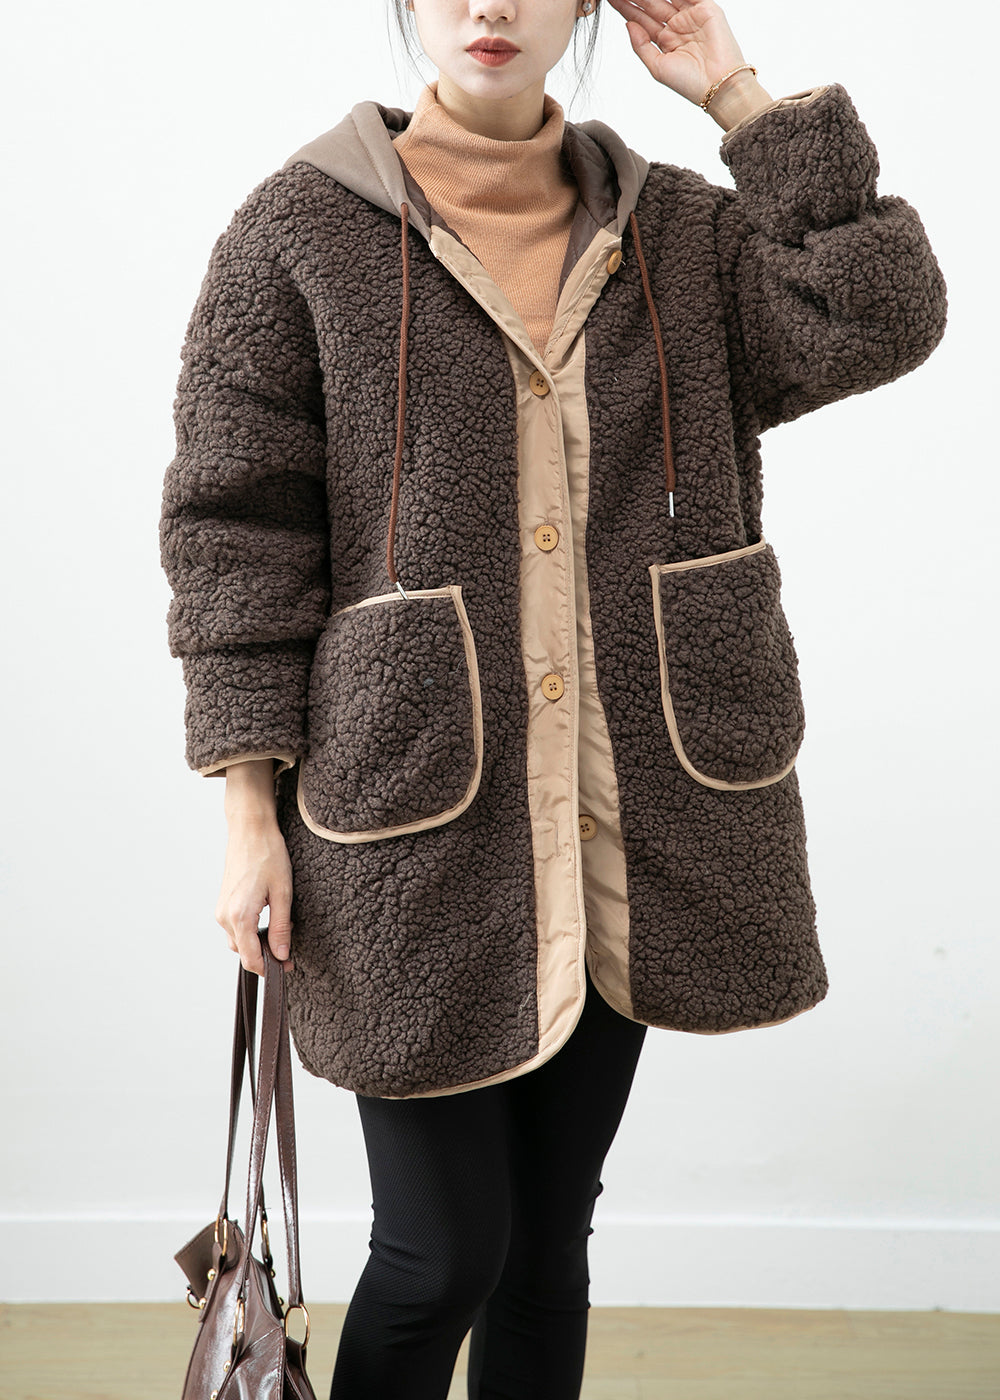 Boho Chocolate Hooded Patchwork Pockets Teddy Faux Fur Coats Winter